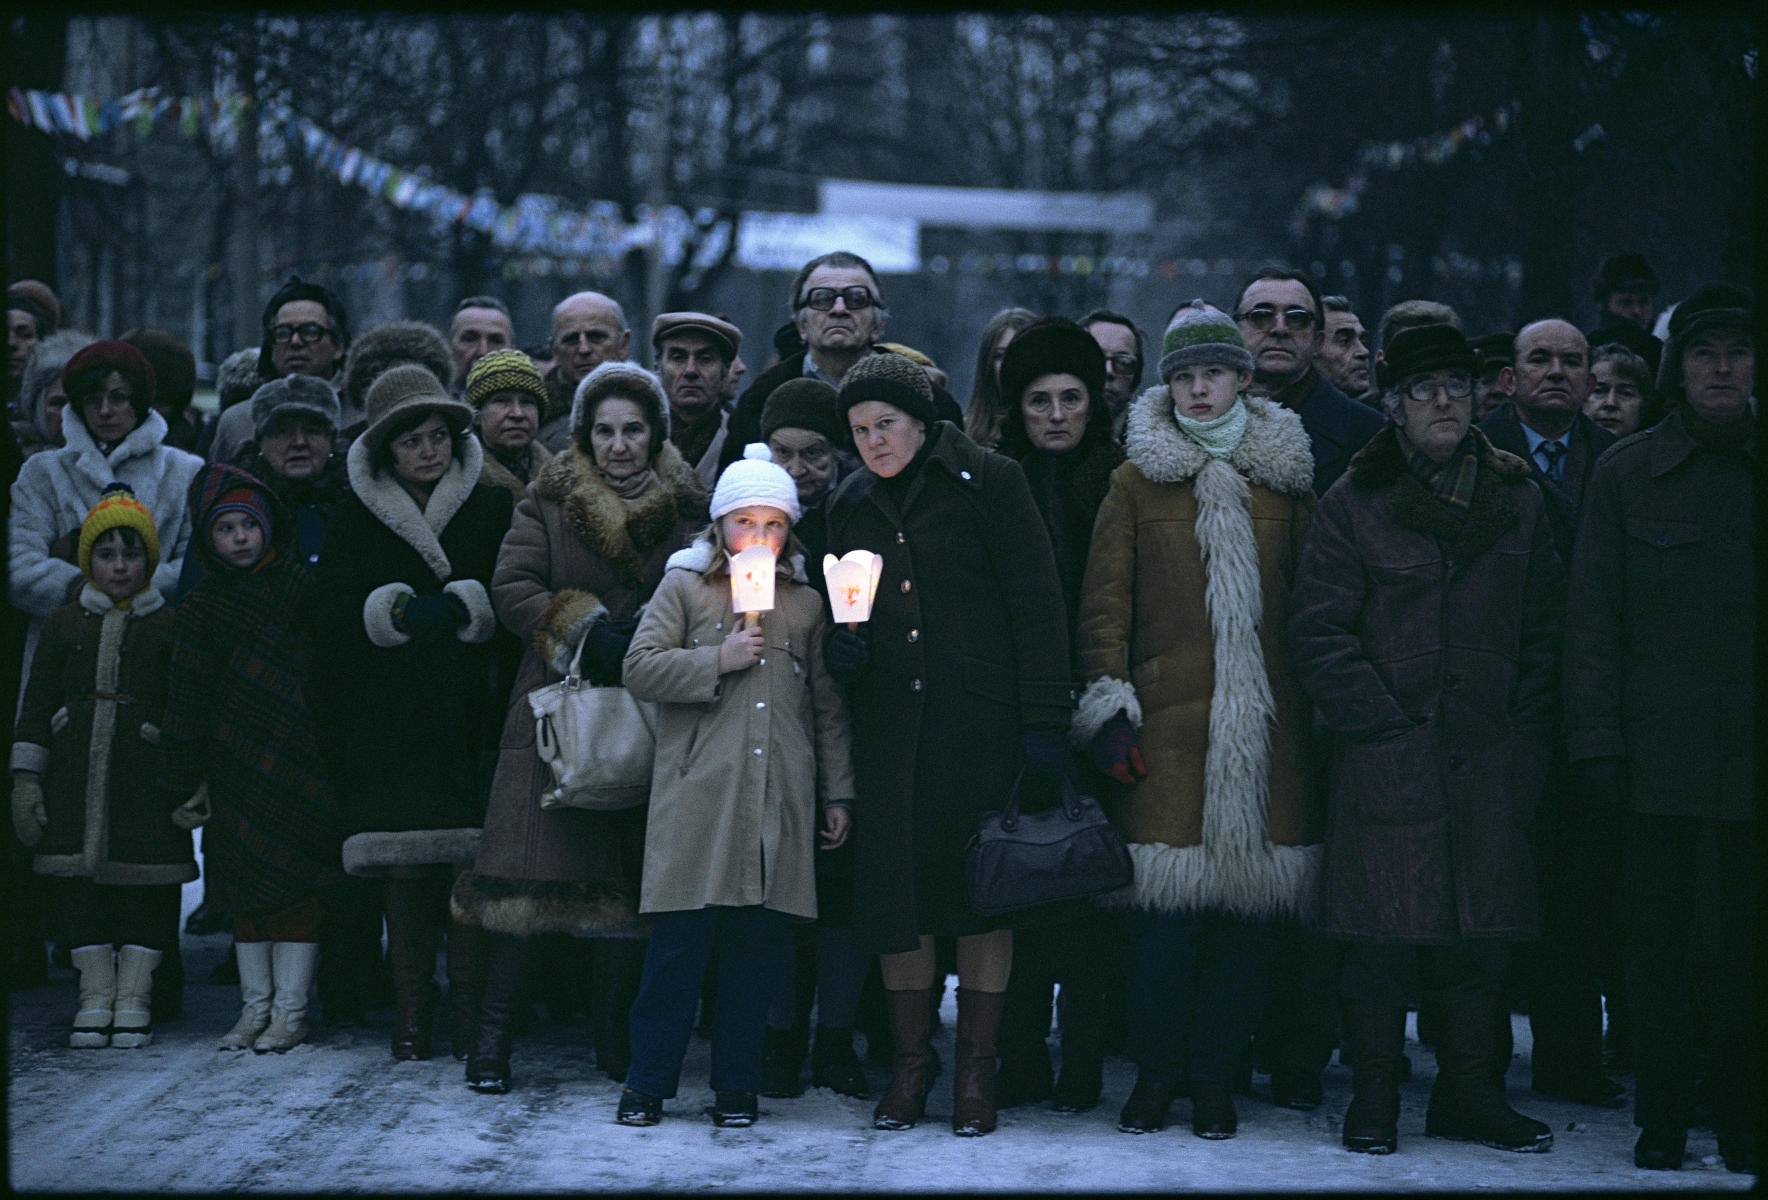 In the days before Christmas 1981, Polish citizens gather to silently protest the arrival of Martial Law, and quashing of Solidarity   : Looking Back: 60 Years of Photographs : David Burnett | Photographer